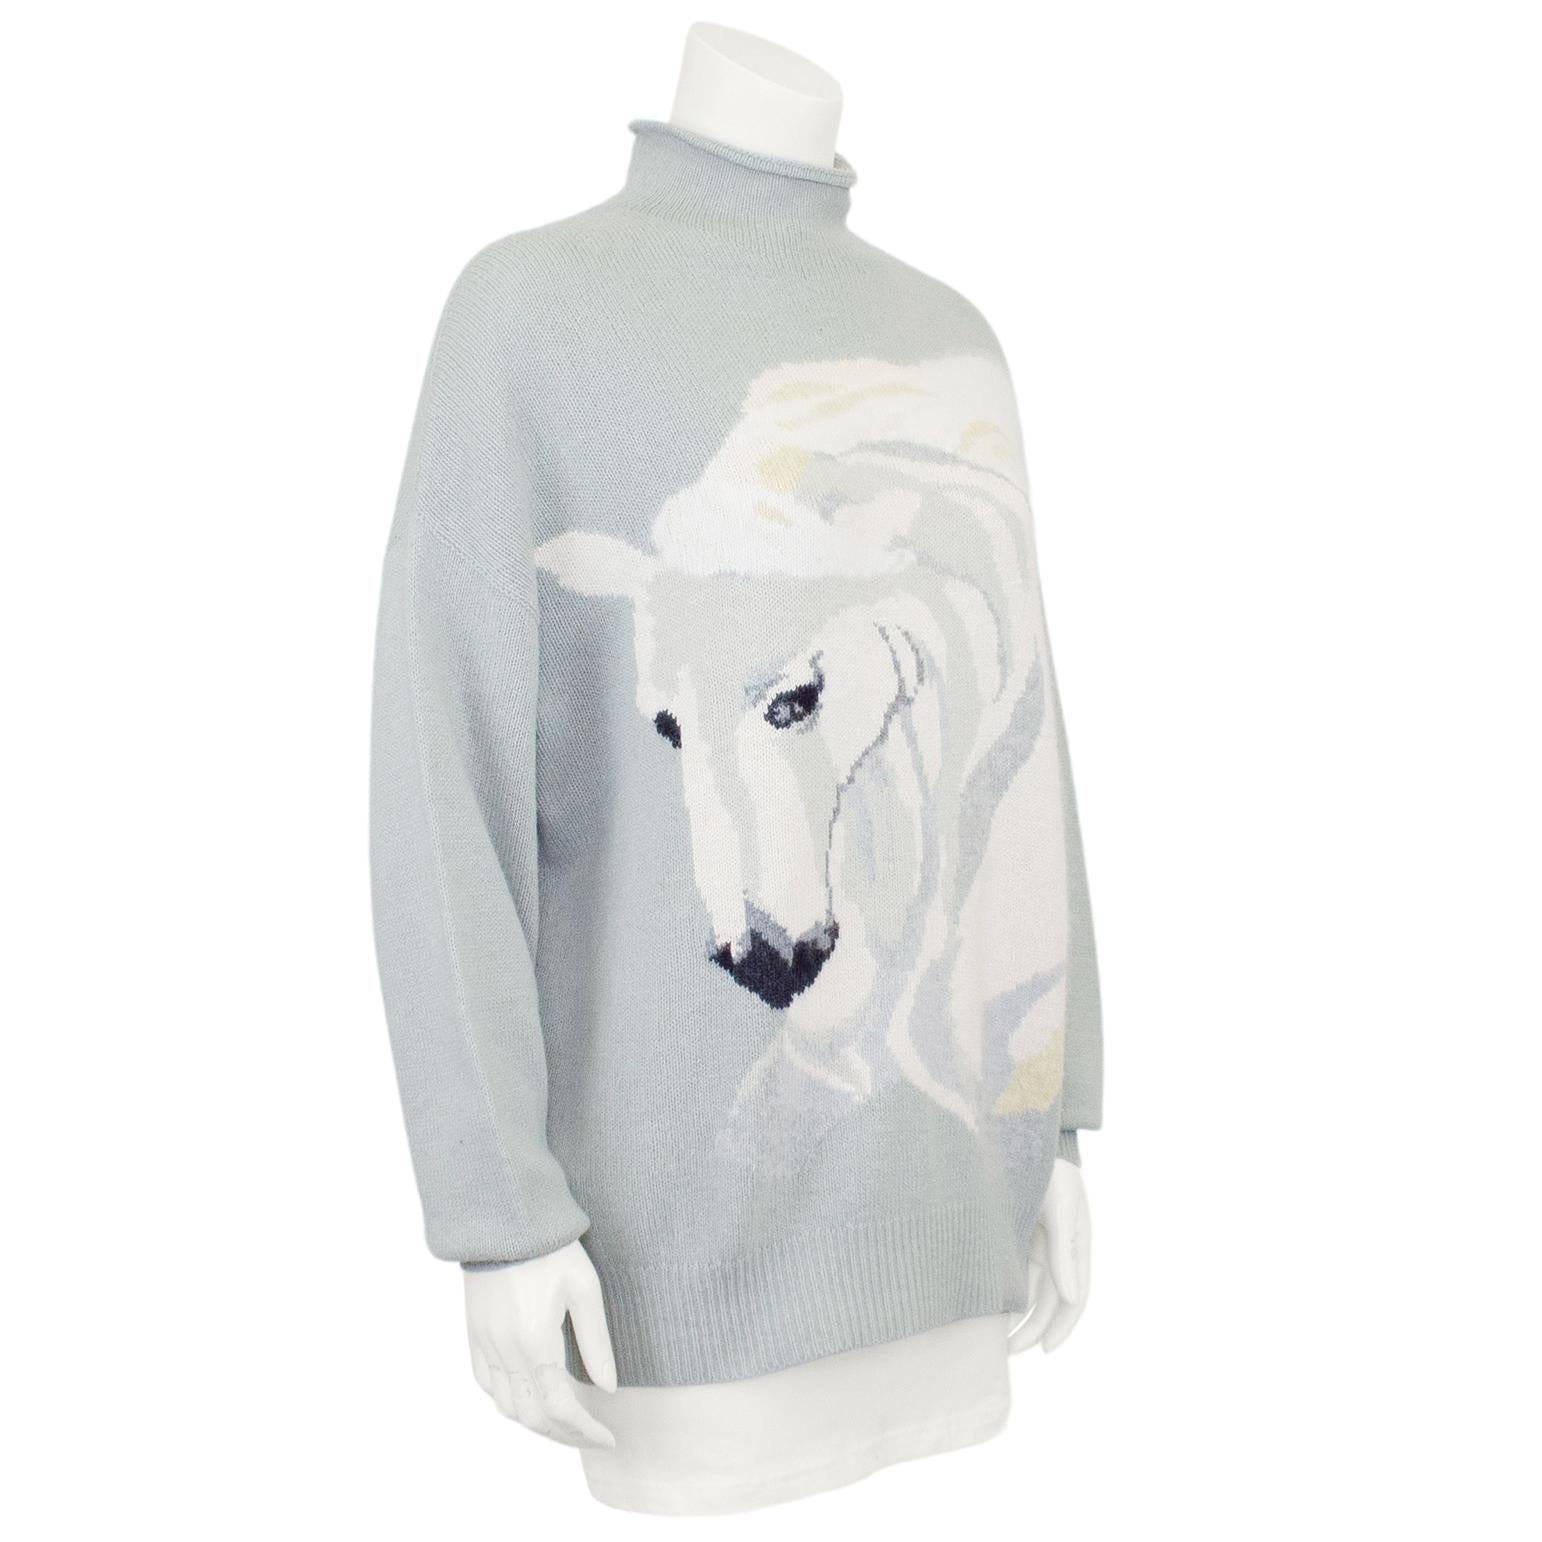 Known for their incredible knits featuring animals, this sweater is the ultimate 1980s Krizia piece. Oversized pale blue wool roll neck sweater with a large and majestic white horse head graphic. Dropped shoulder, dolman sleeves and ribbed cuffs and